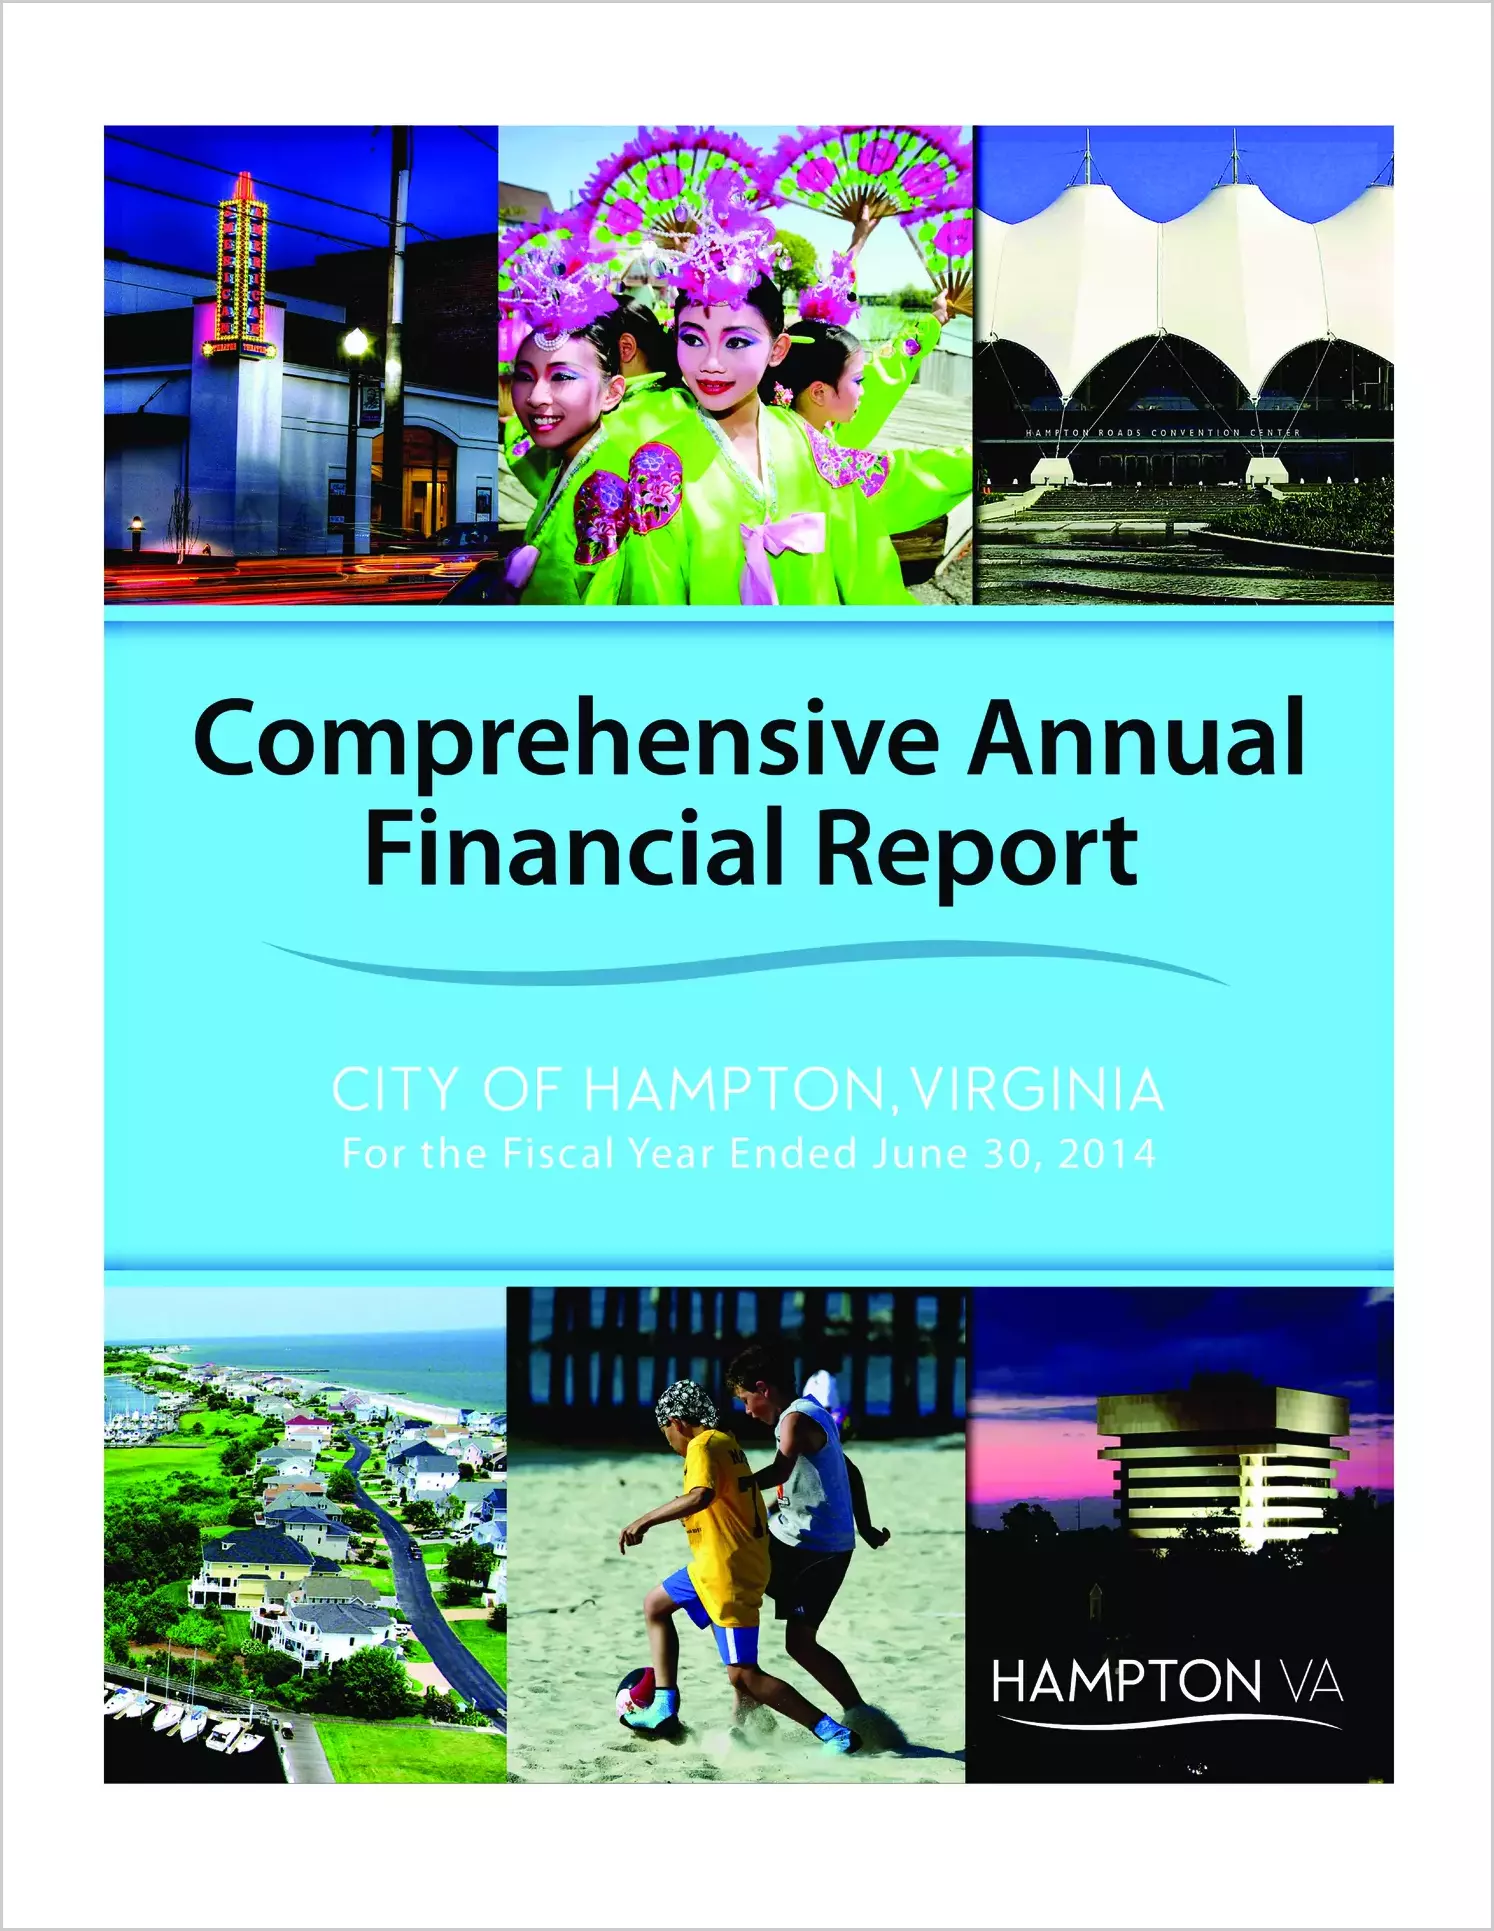 2014 Annual Financial Report for City of Hampton